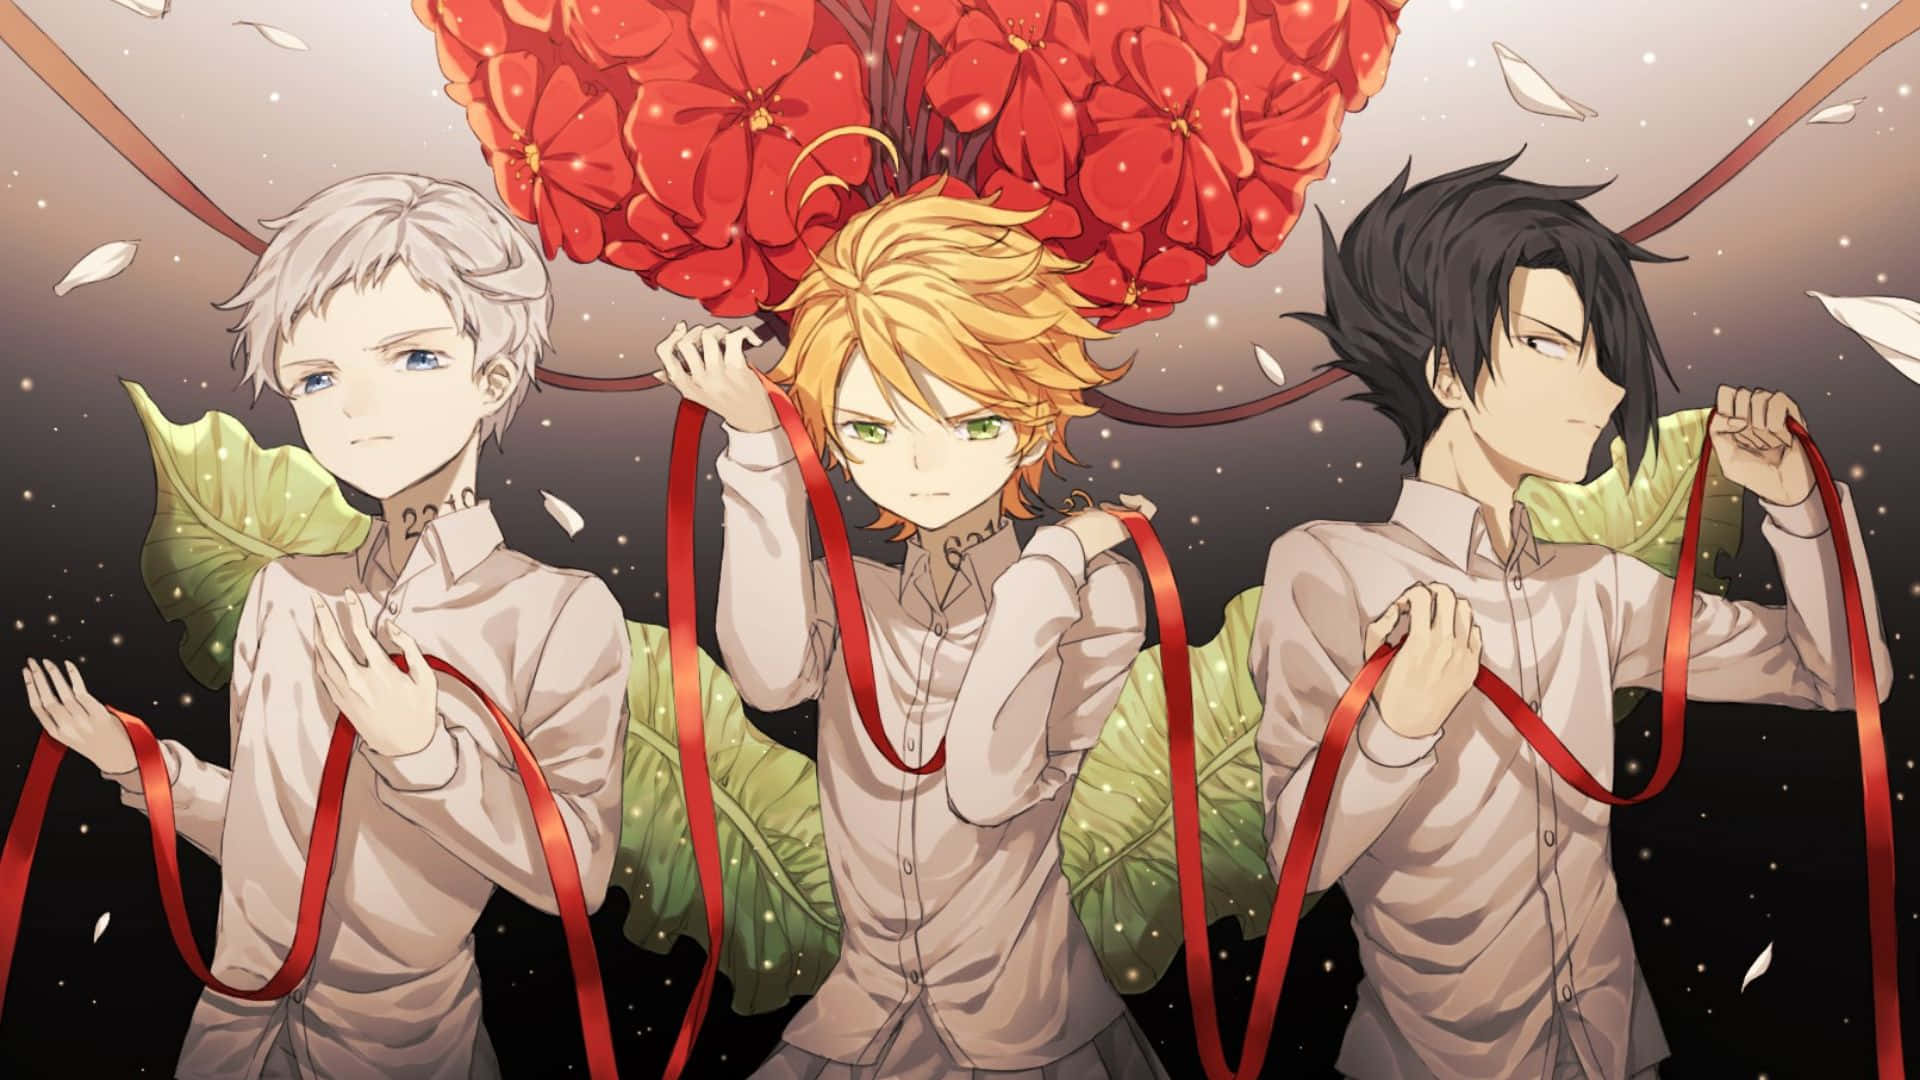 Featuring characters from The Promised Neverland anime series in a captivating scene